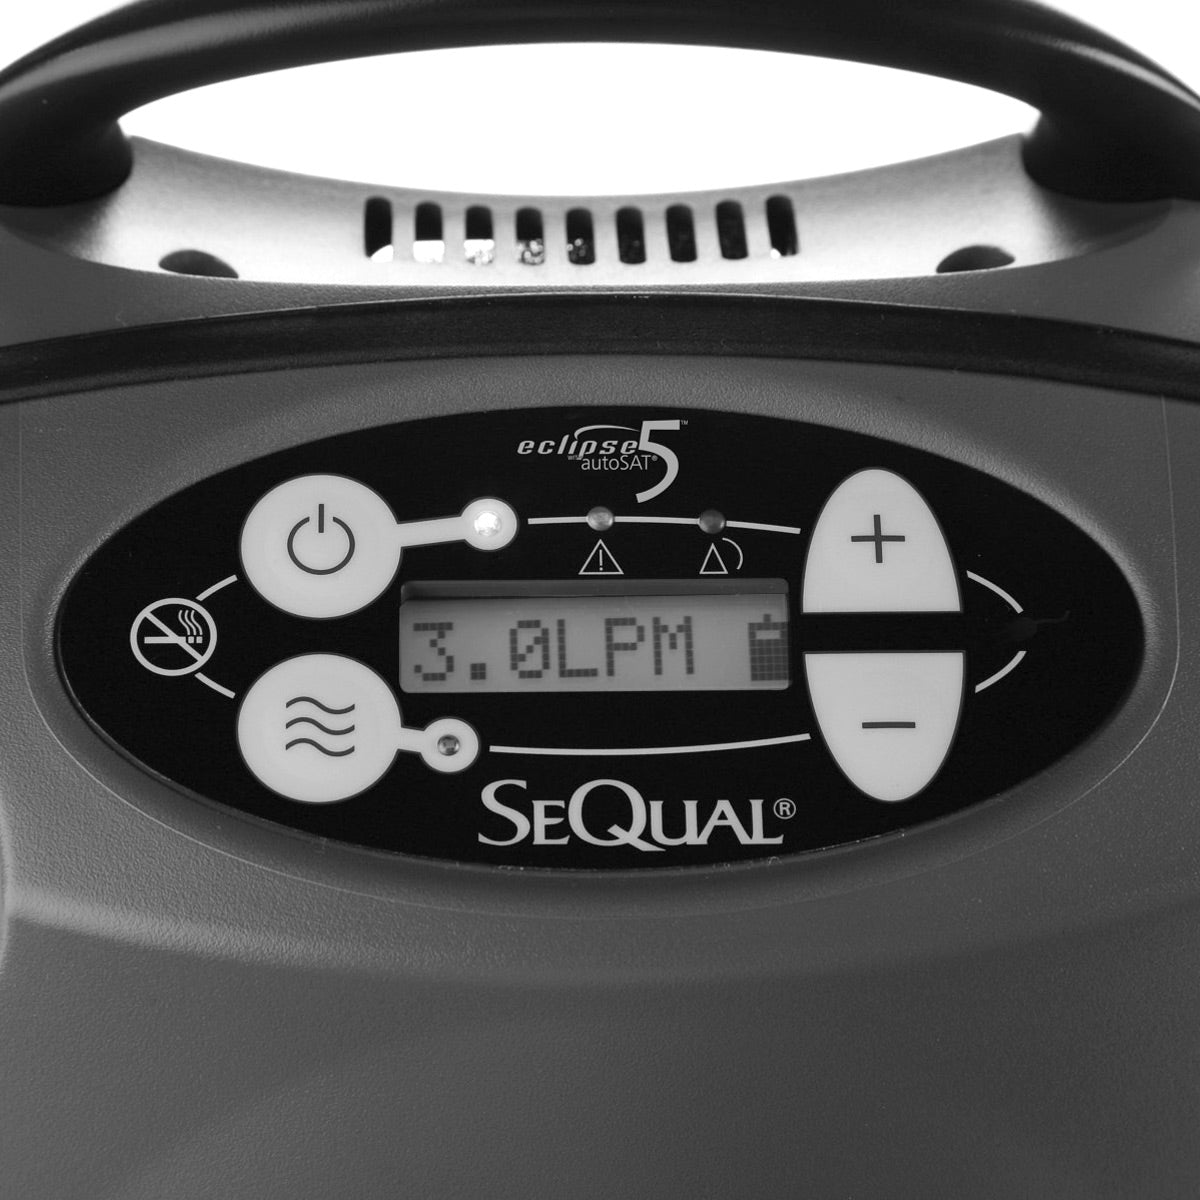 Eclipse 5 Portable Oxygen Concentrator Package (Continuous Flow & Pulse Dose) - CERTIFIED PRE-OWNED